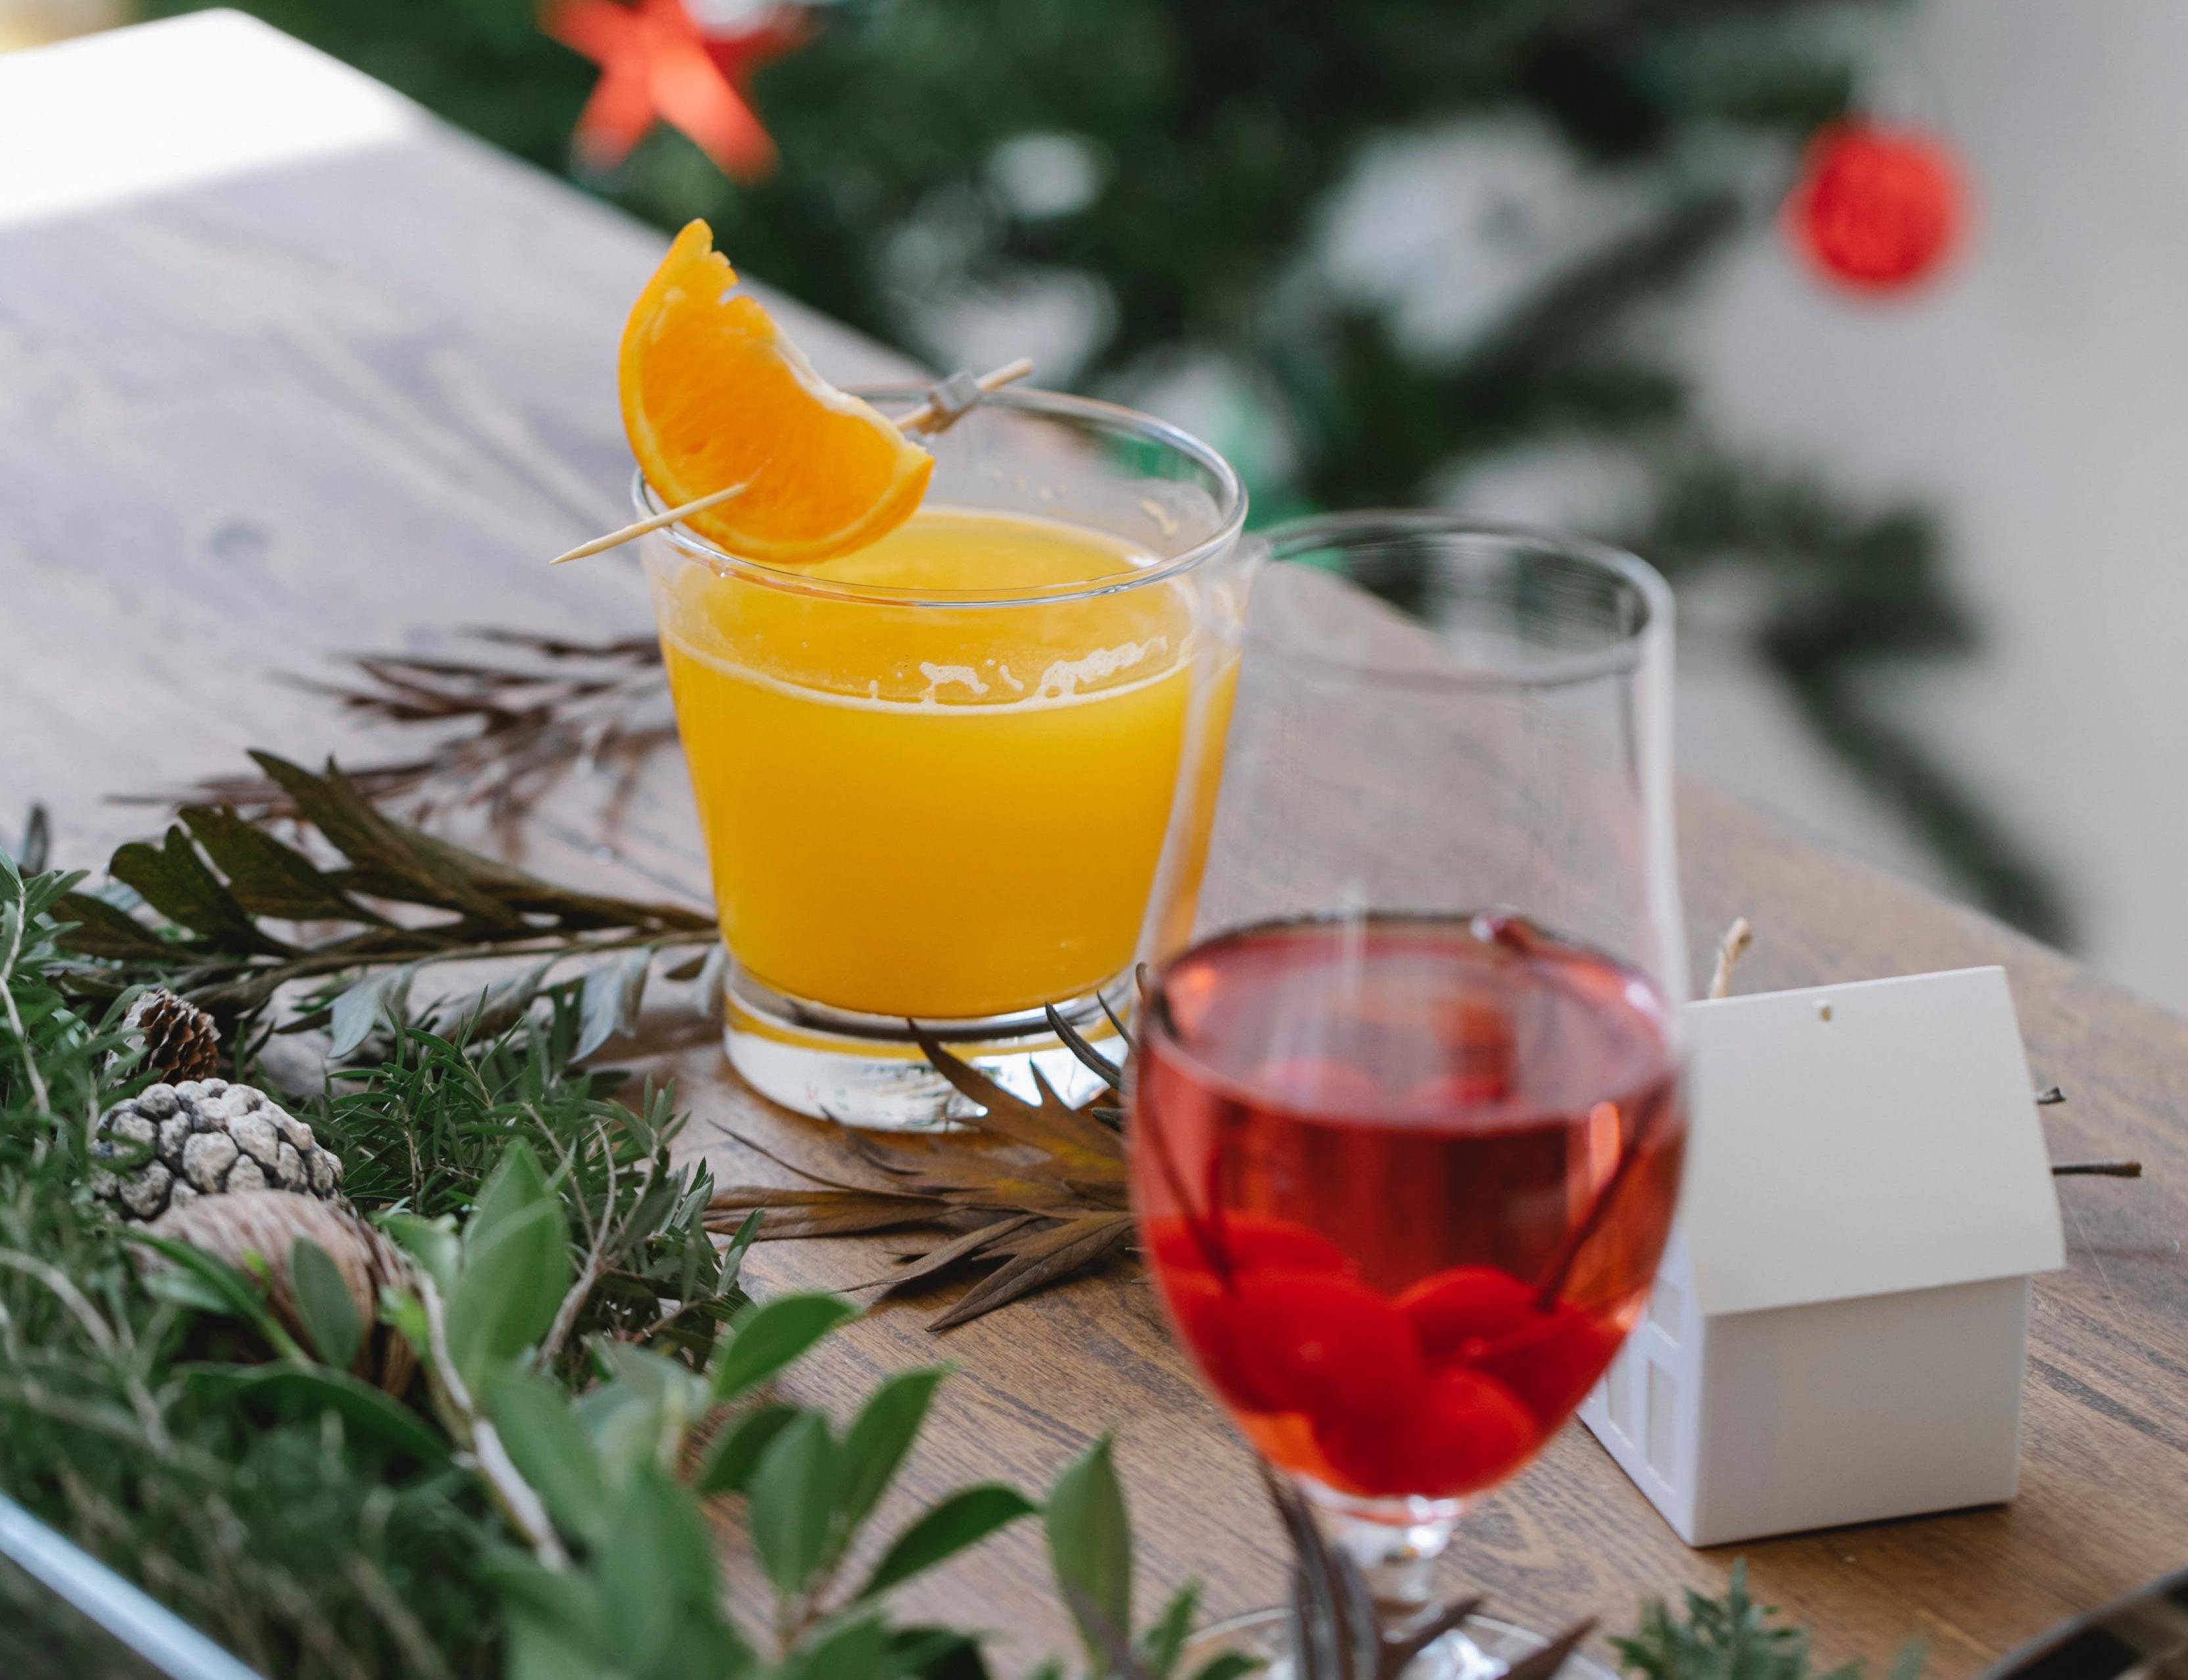 Get ready to spread some holiday cheer with these 10 festive Christmas cocktails that are sure to delight your guests! 🎄🍹 cover image